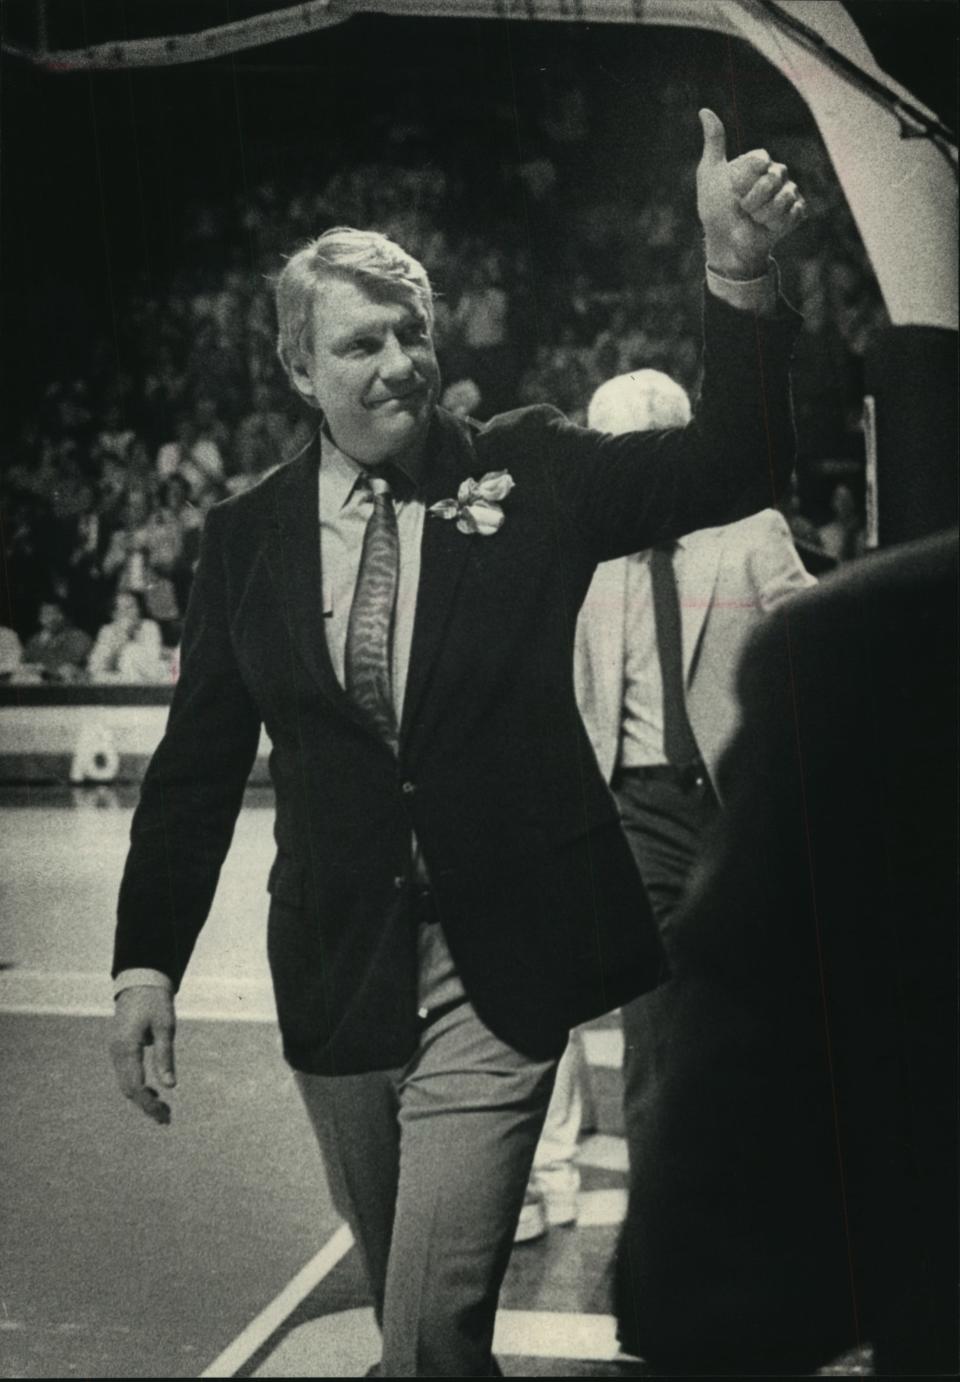 Bucks coach Don Nelson showed confidence before a 121-11 win for the Bucks in Game 6 of the 1987 Eastern Conference semifinals against Boston at the Milwaukee Arena.